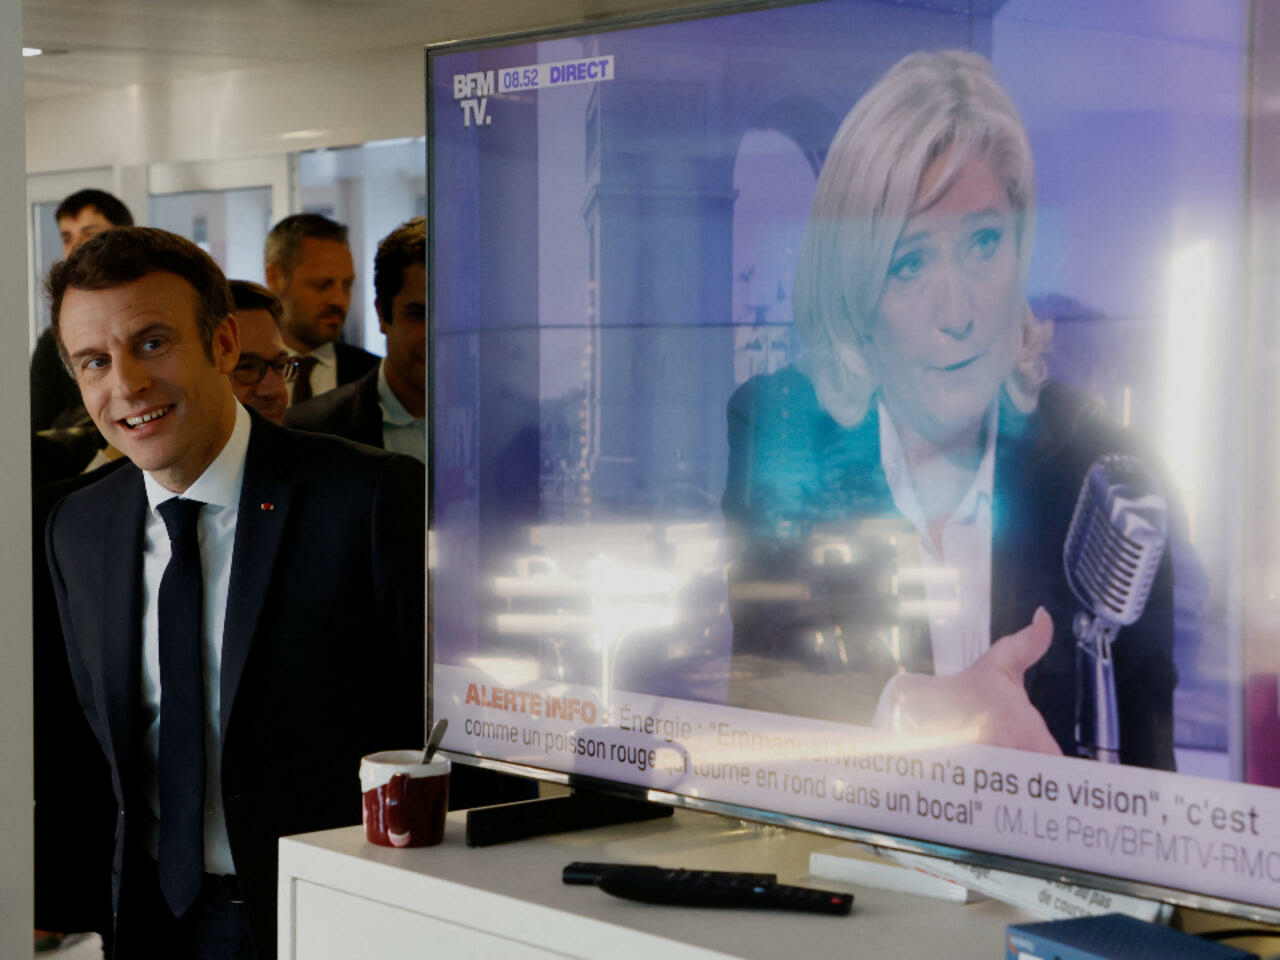 Macron, Le Pen accused of vetoing 'tenacious' reporter from moderating high-stakes debate